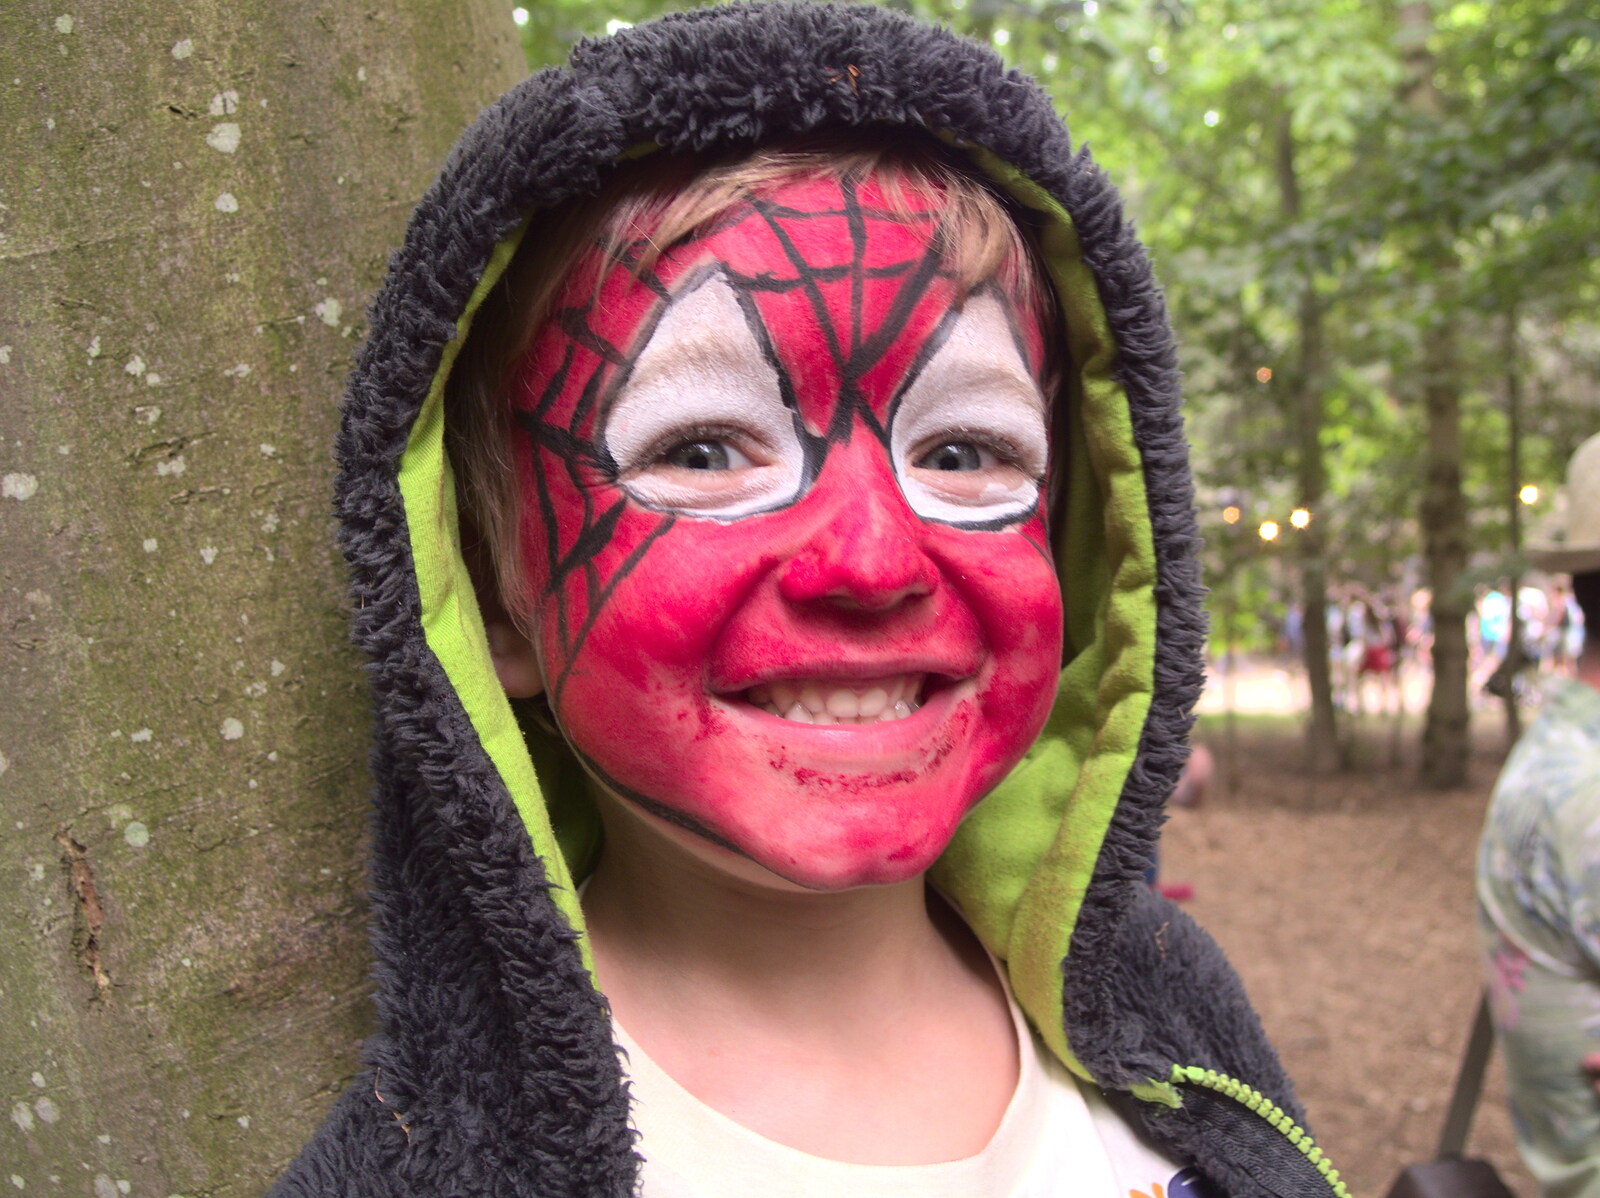 Fred shows off his face paint from The 8th Latitude Festival, Henham Park, Southwold, Suffolk - 18th July 2013